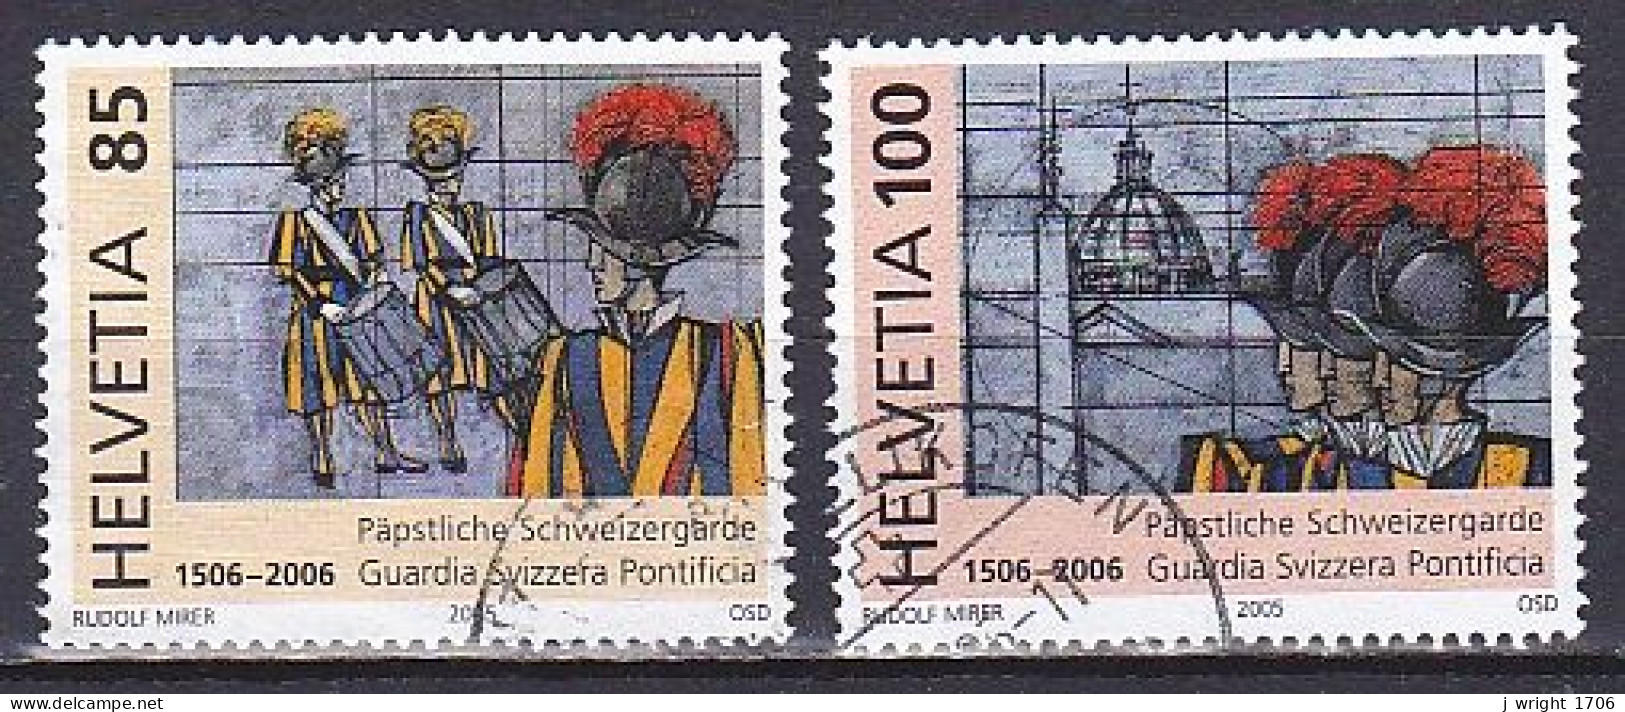 Switzerland, 2005, Swiss Guard, Set, USED - Used Stamps